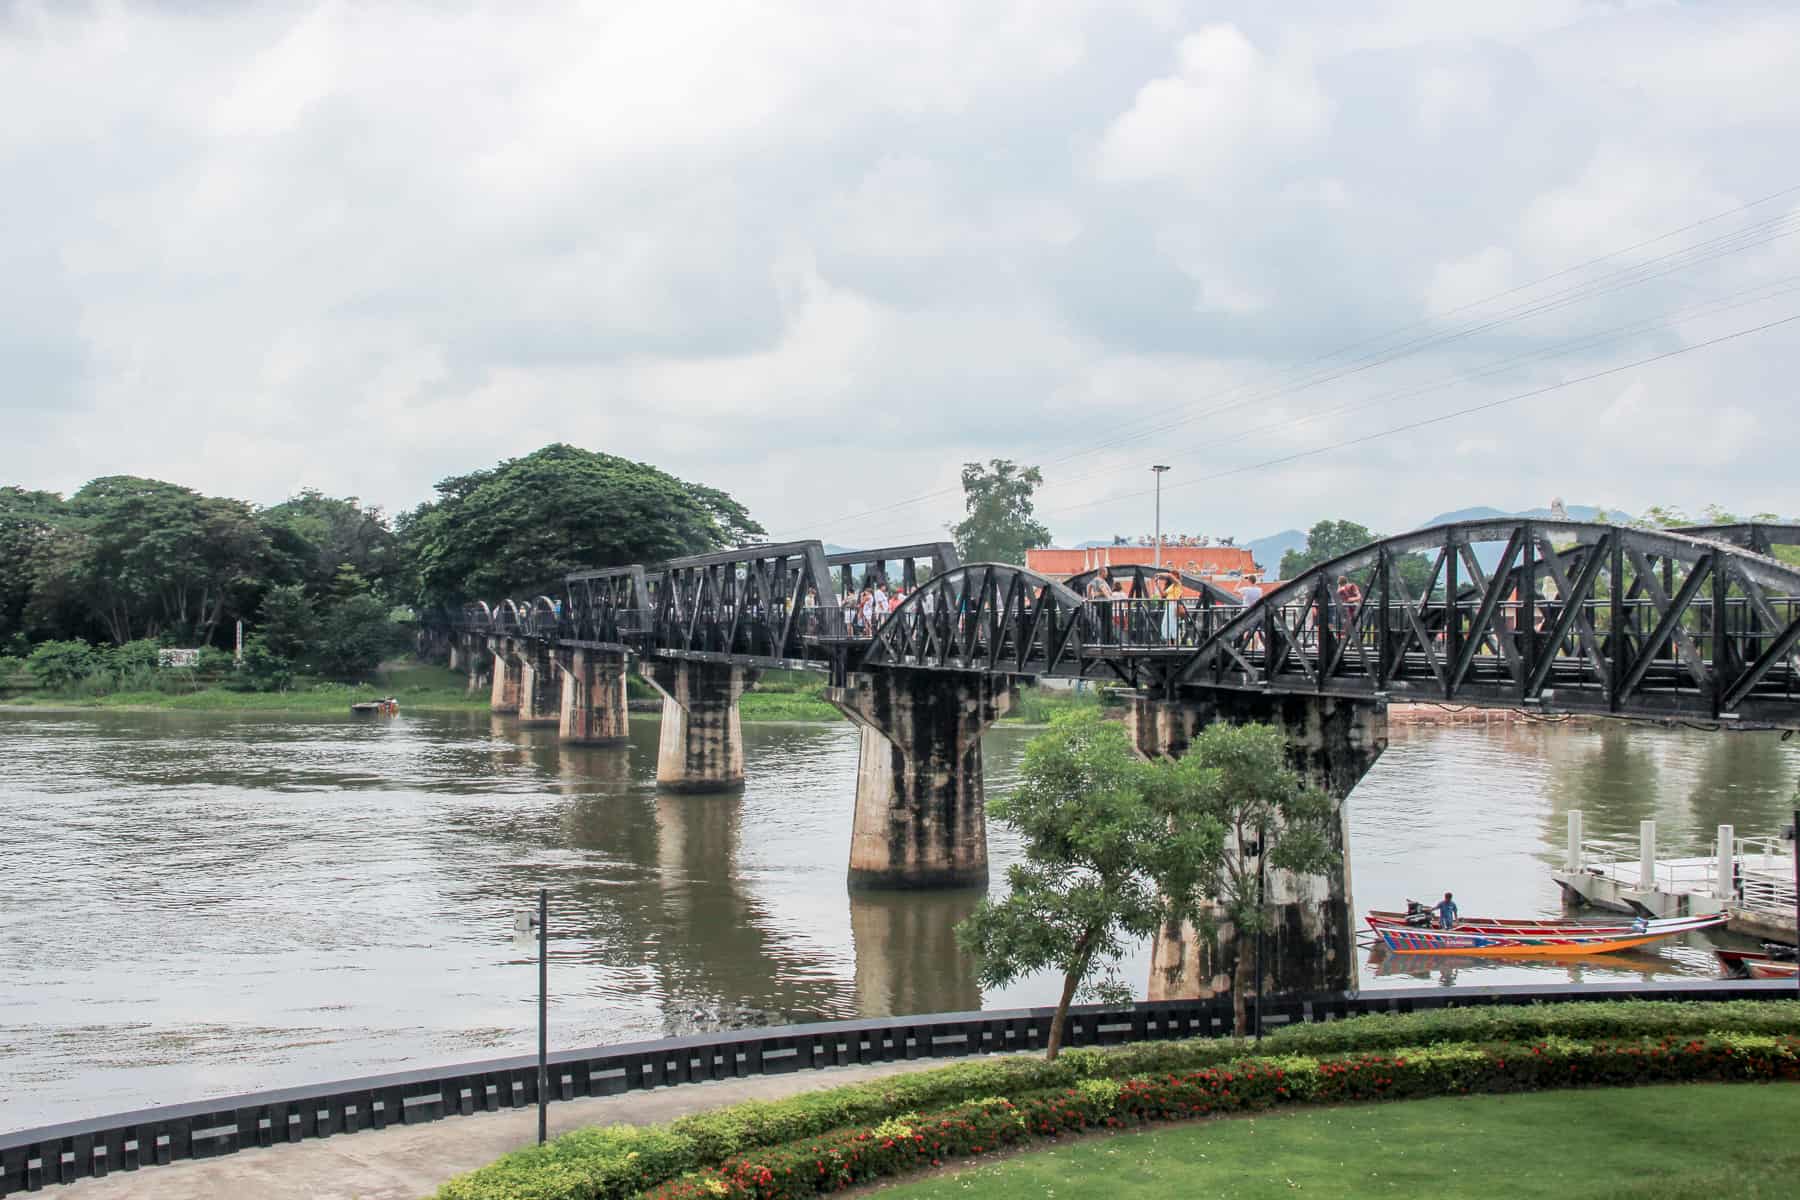 The black iron railings of the Bridge over the River Kwai in Kanchanaburi, Thailand, backed by forest green